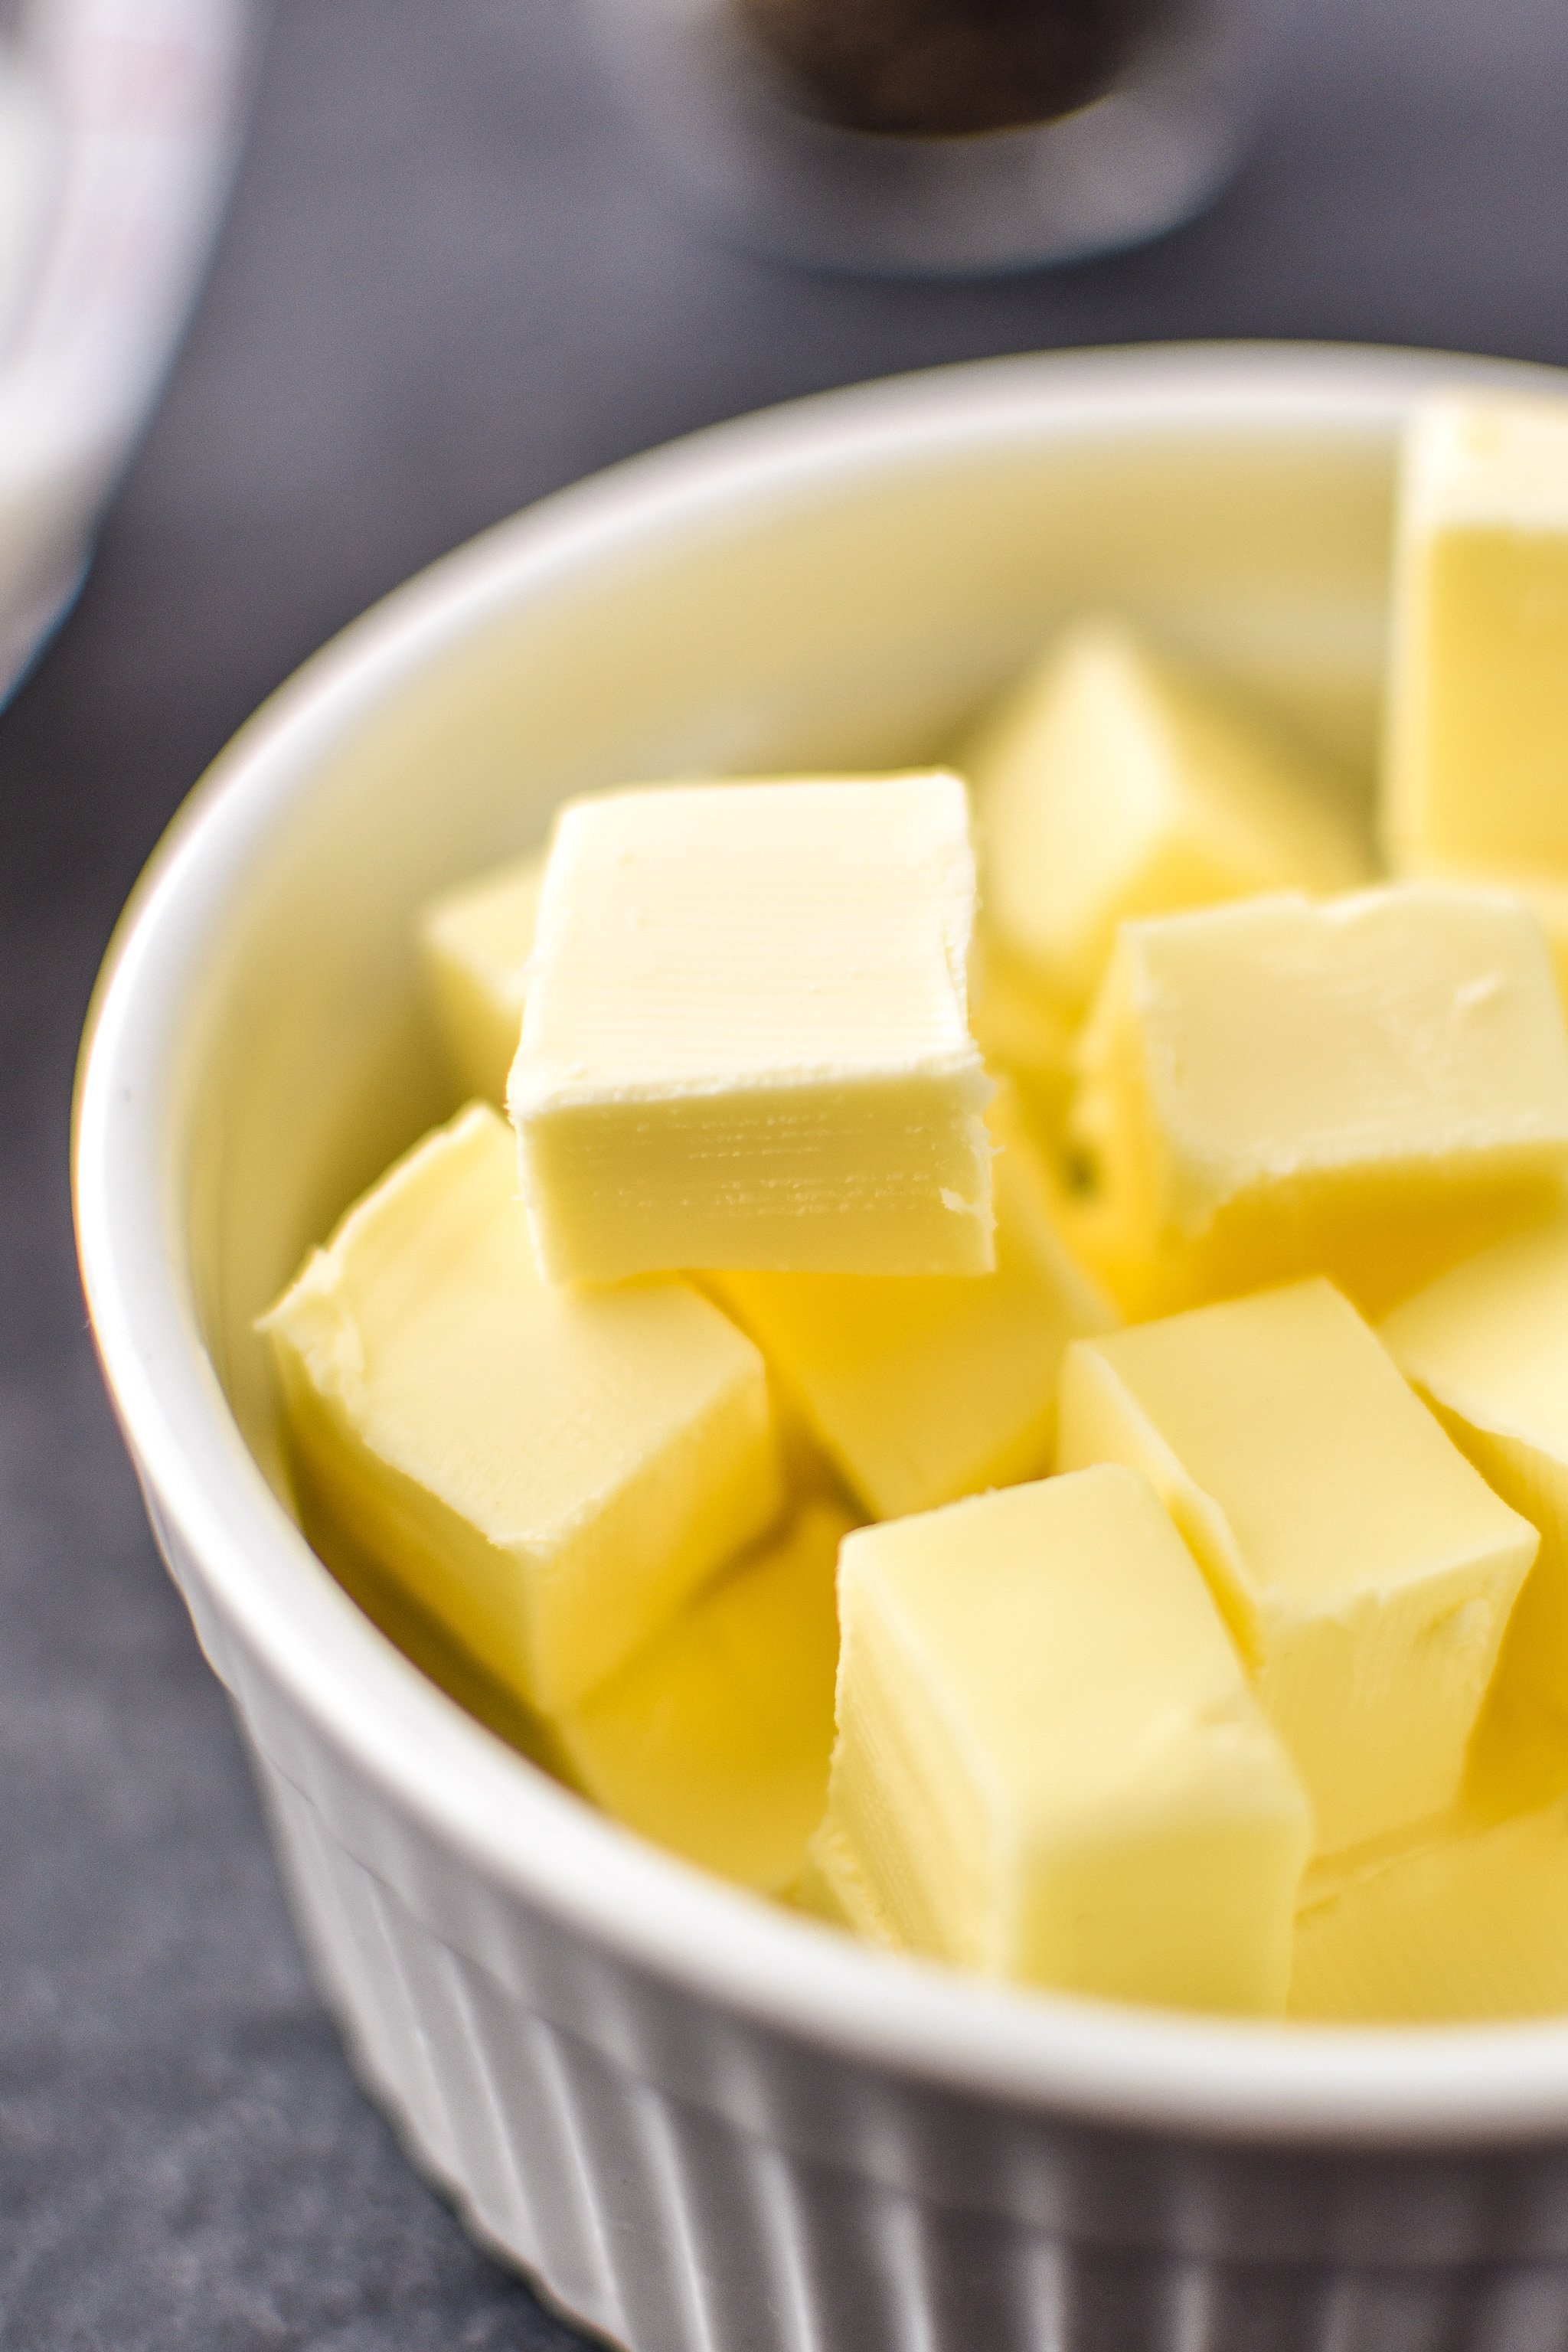 Cubes of butter ready to go into the mashed potatoes.